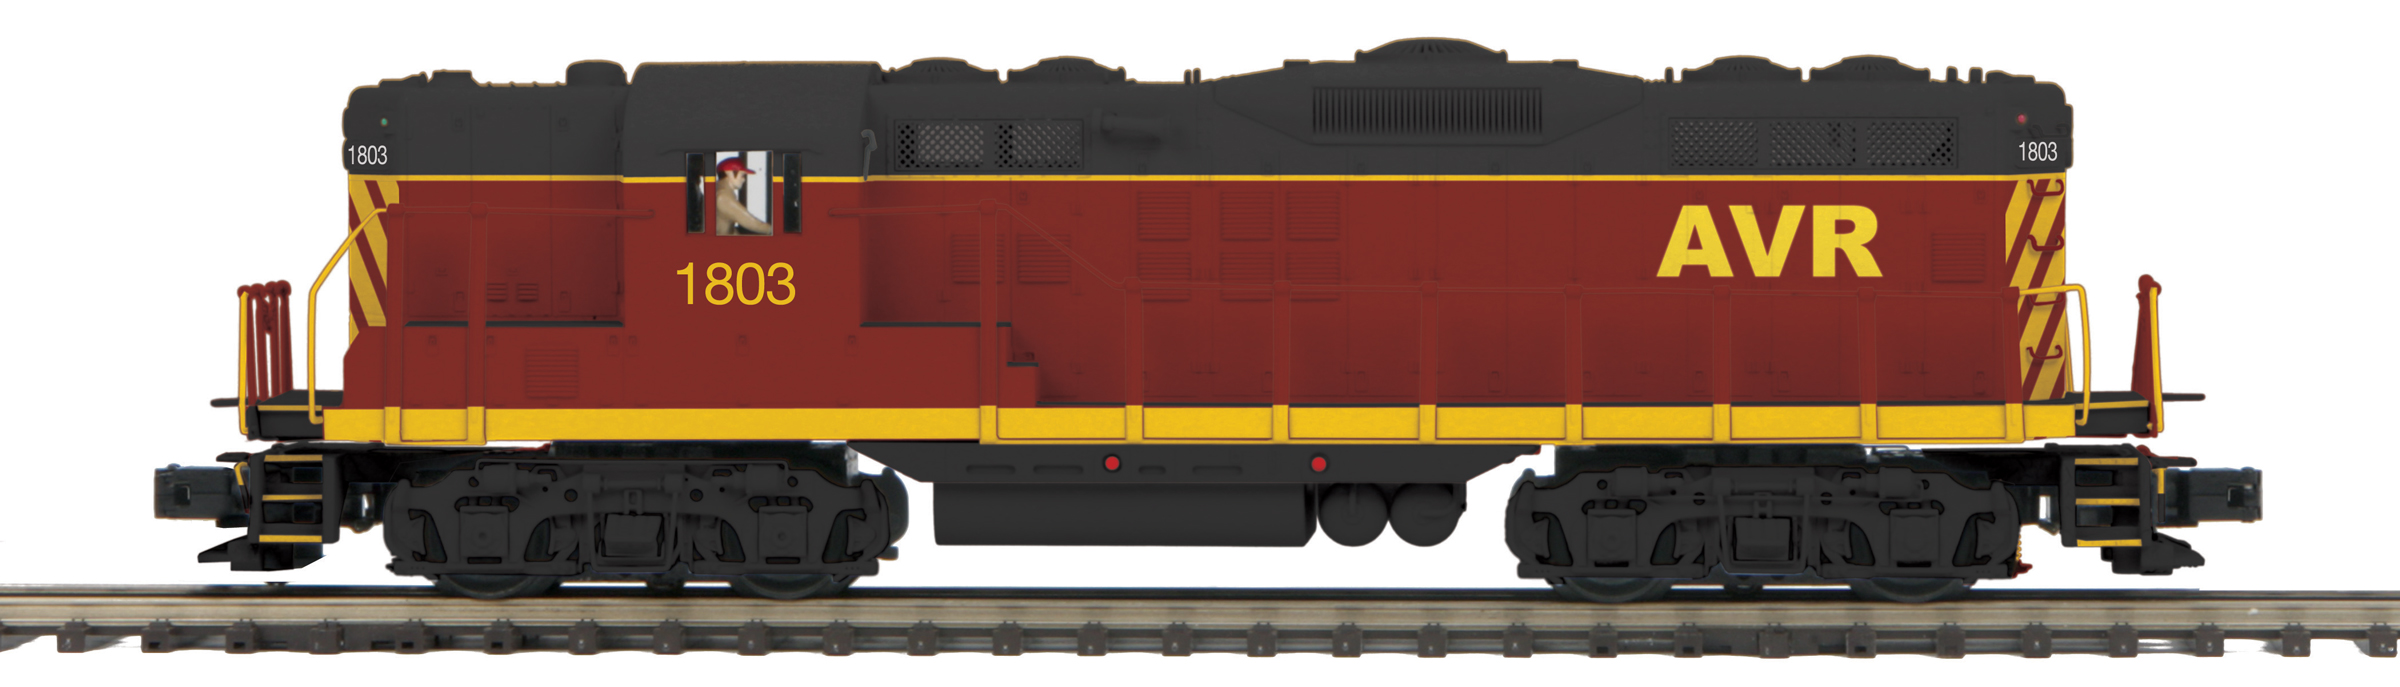 20-21517-1 | MTH ELECTRIC TRAINS